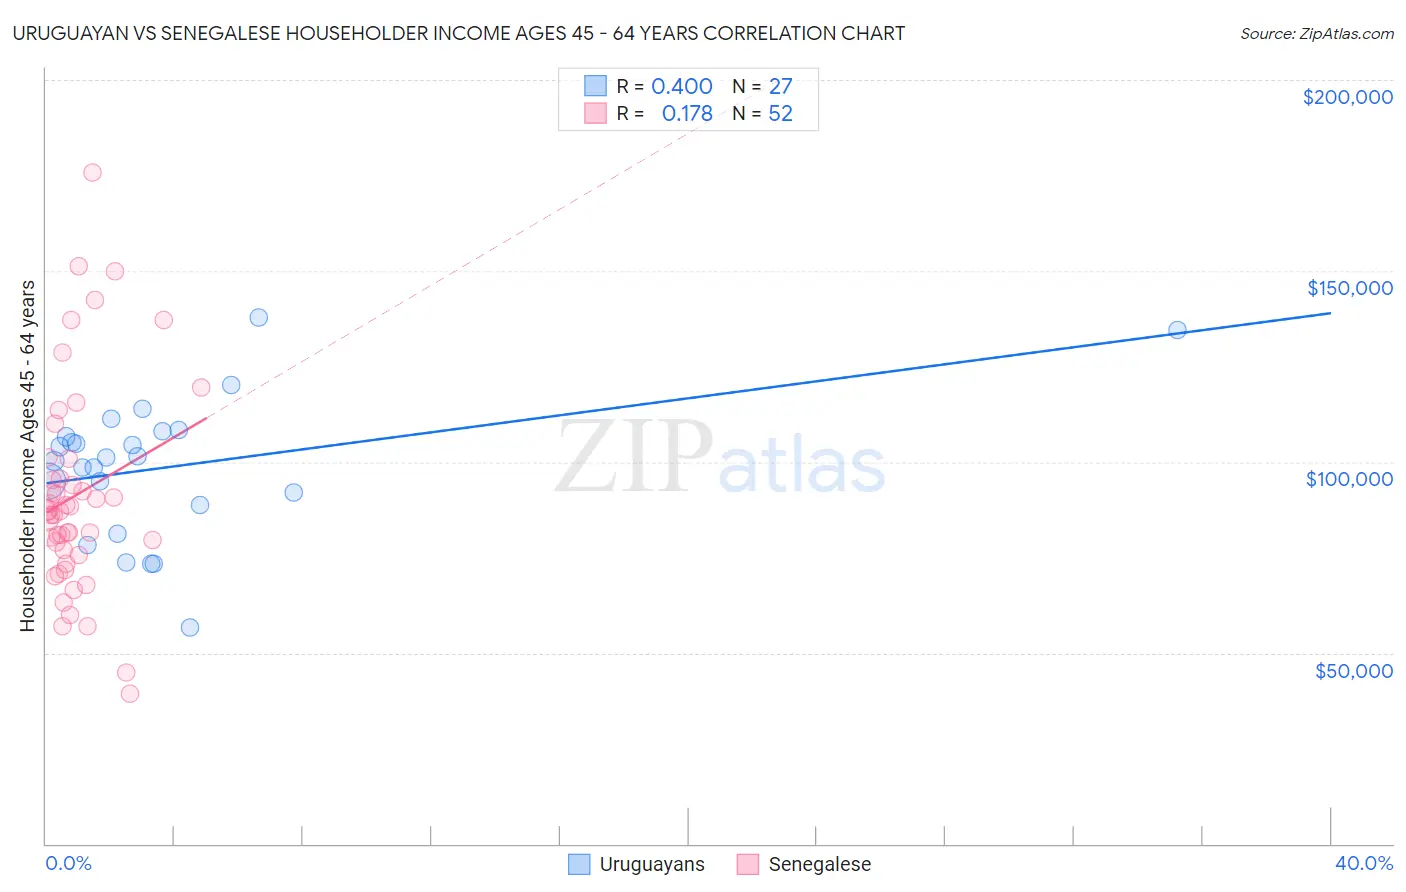 Uruguayan vs Senegalese Householder Income Ages 45 - 64 years